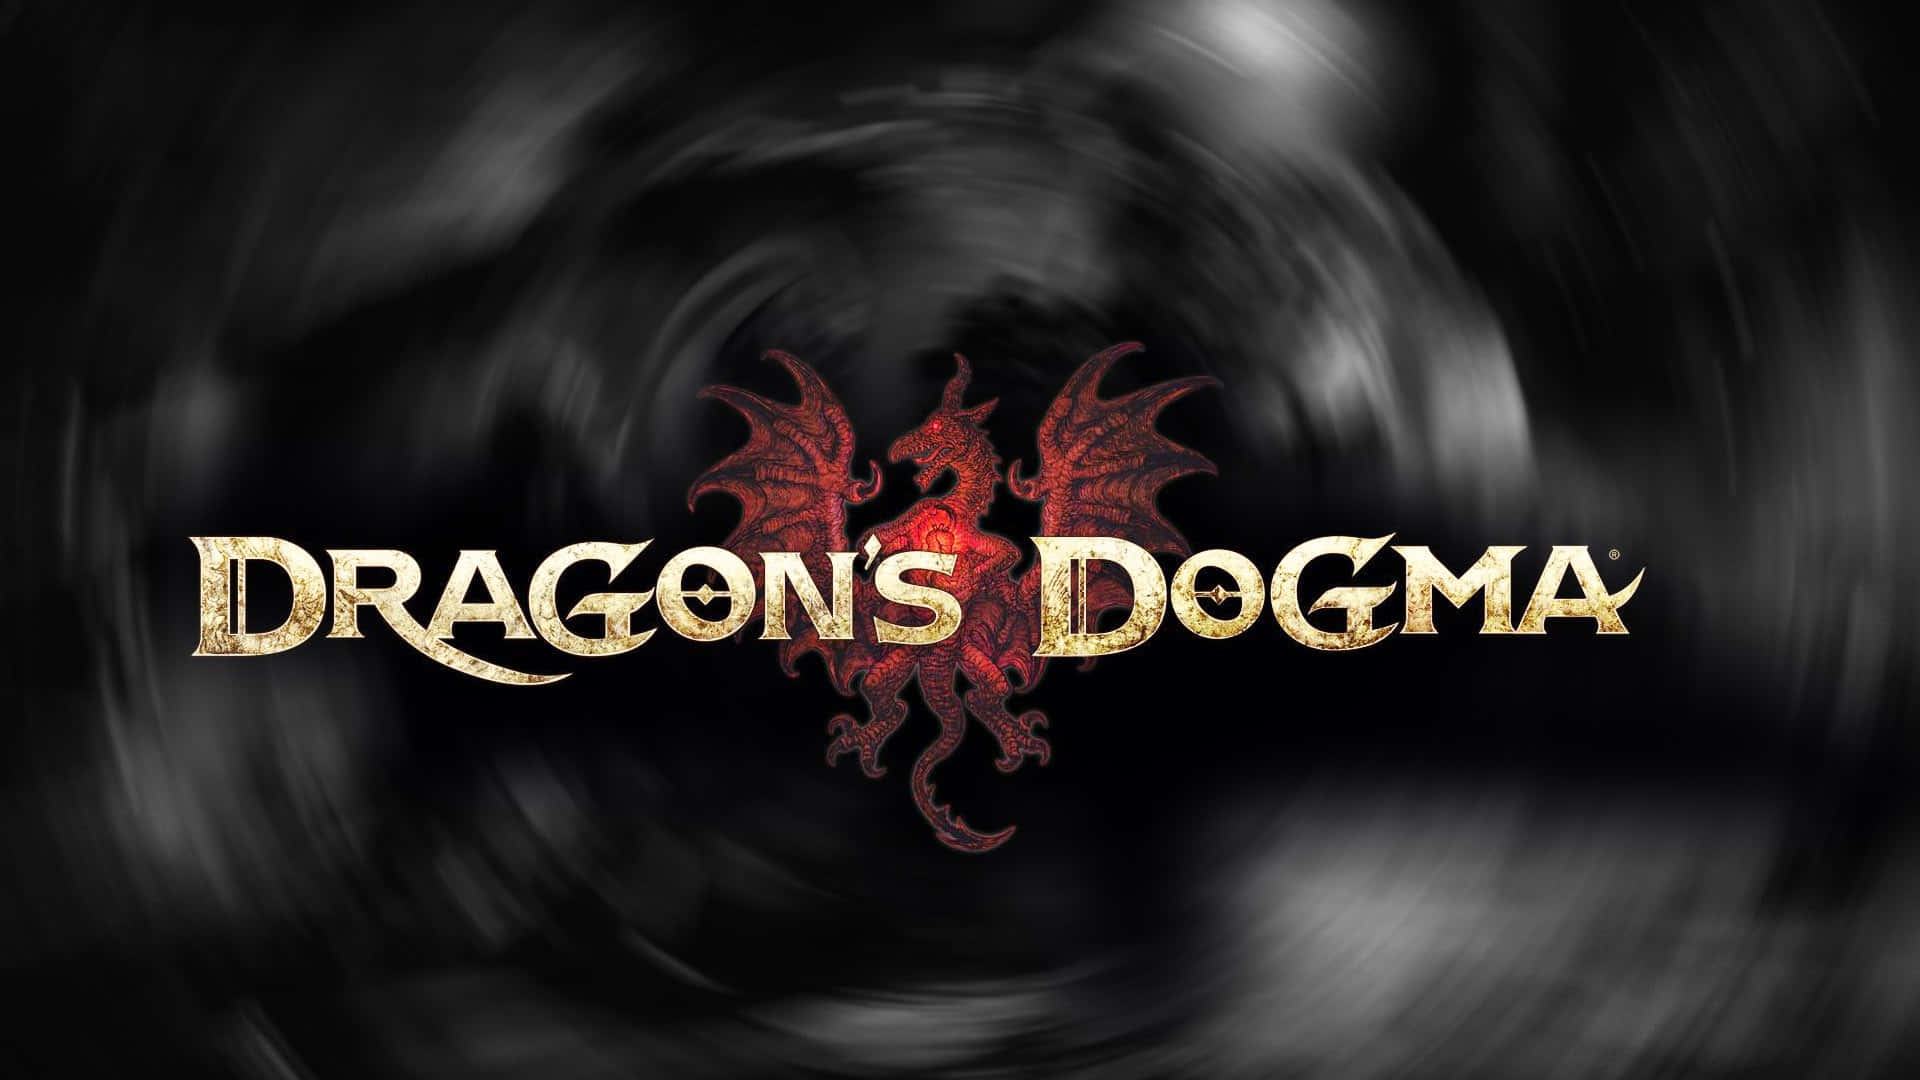 Fantasy Game Of Fighting Dogmatic Dragons Wallpaper